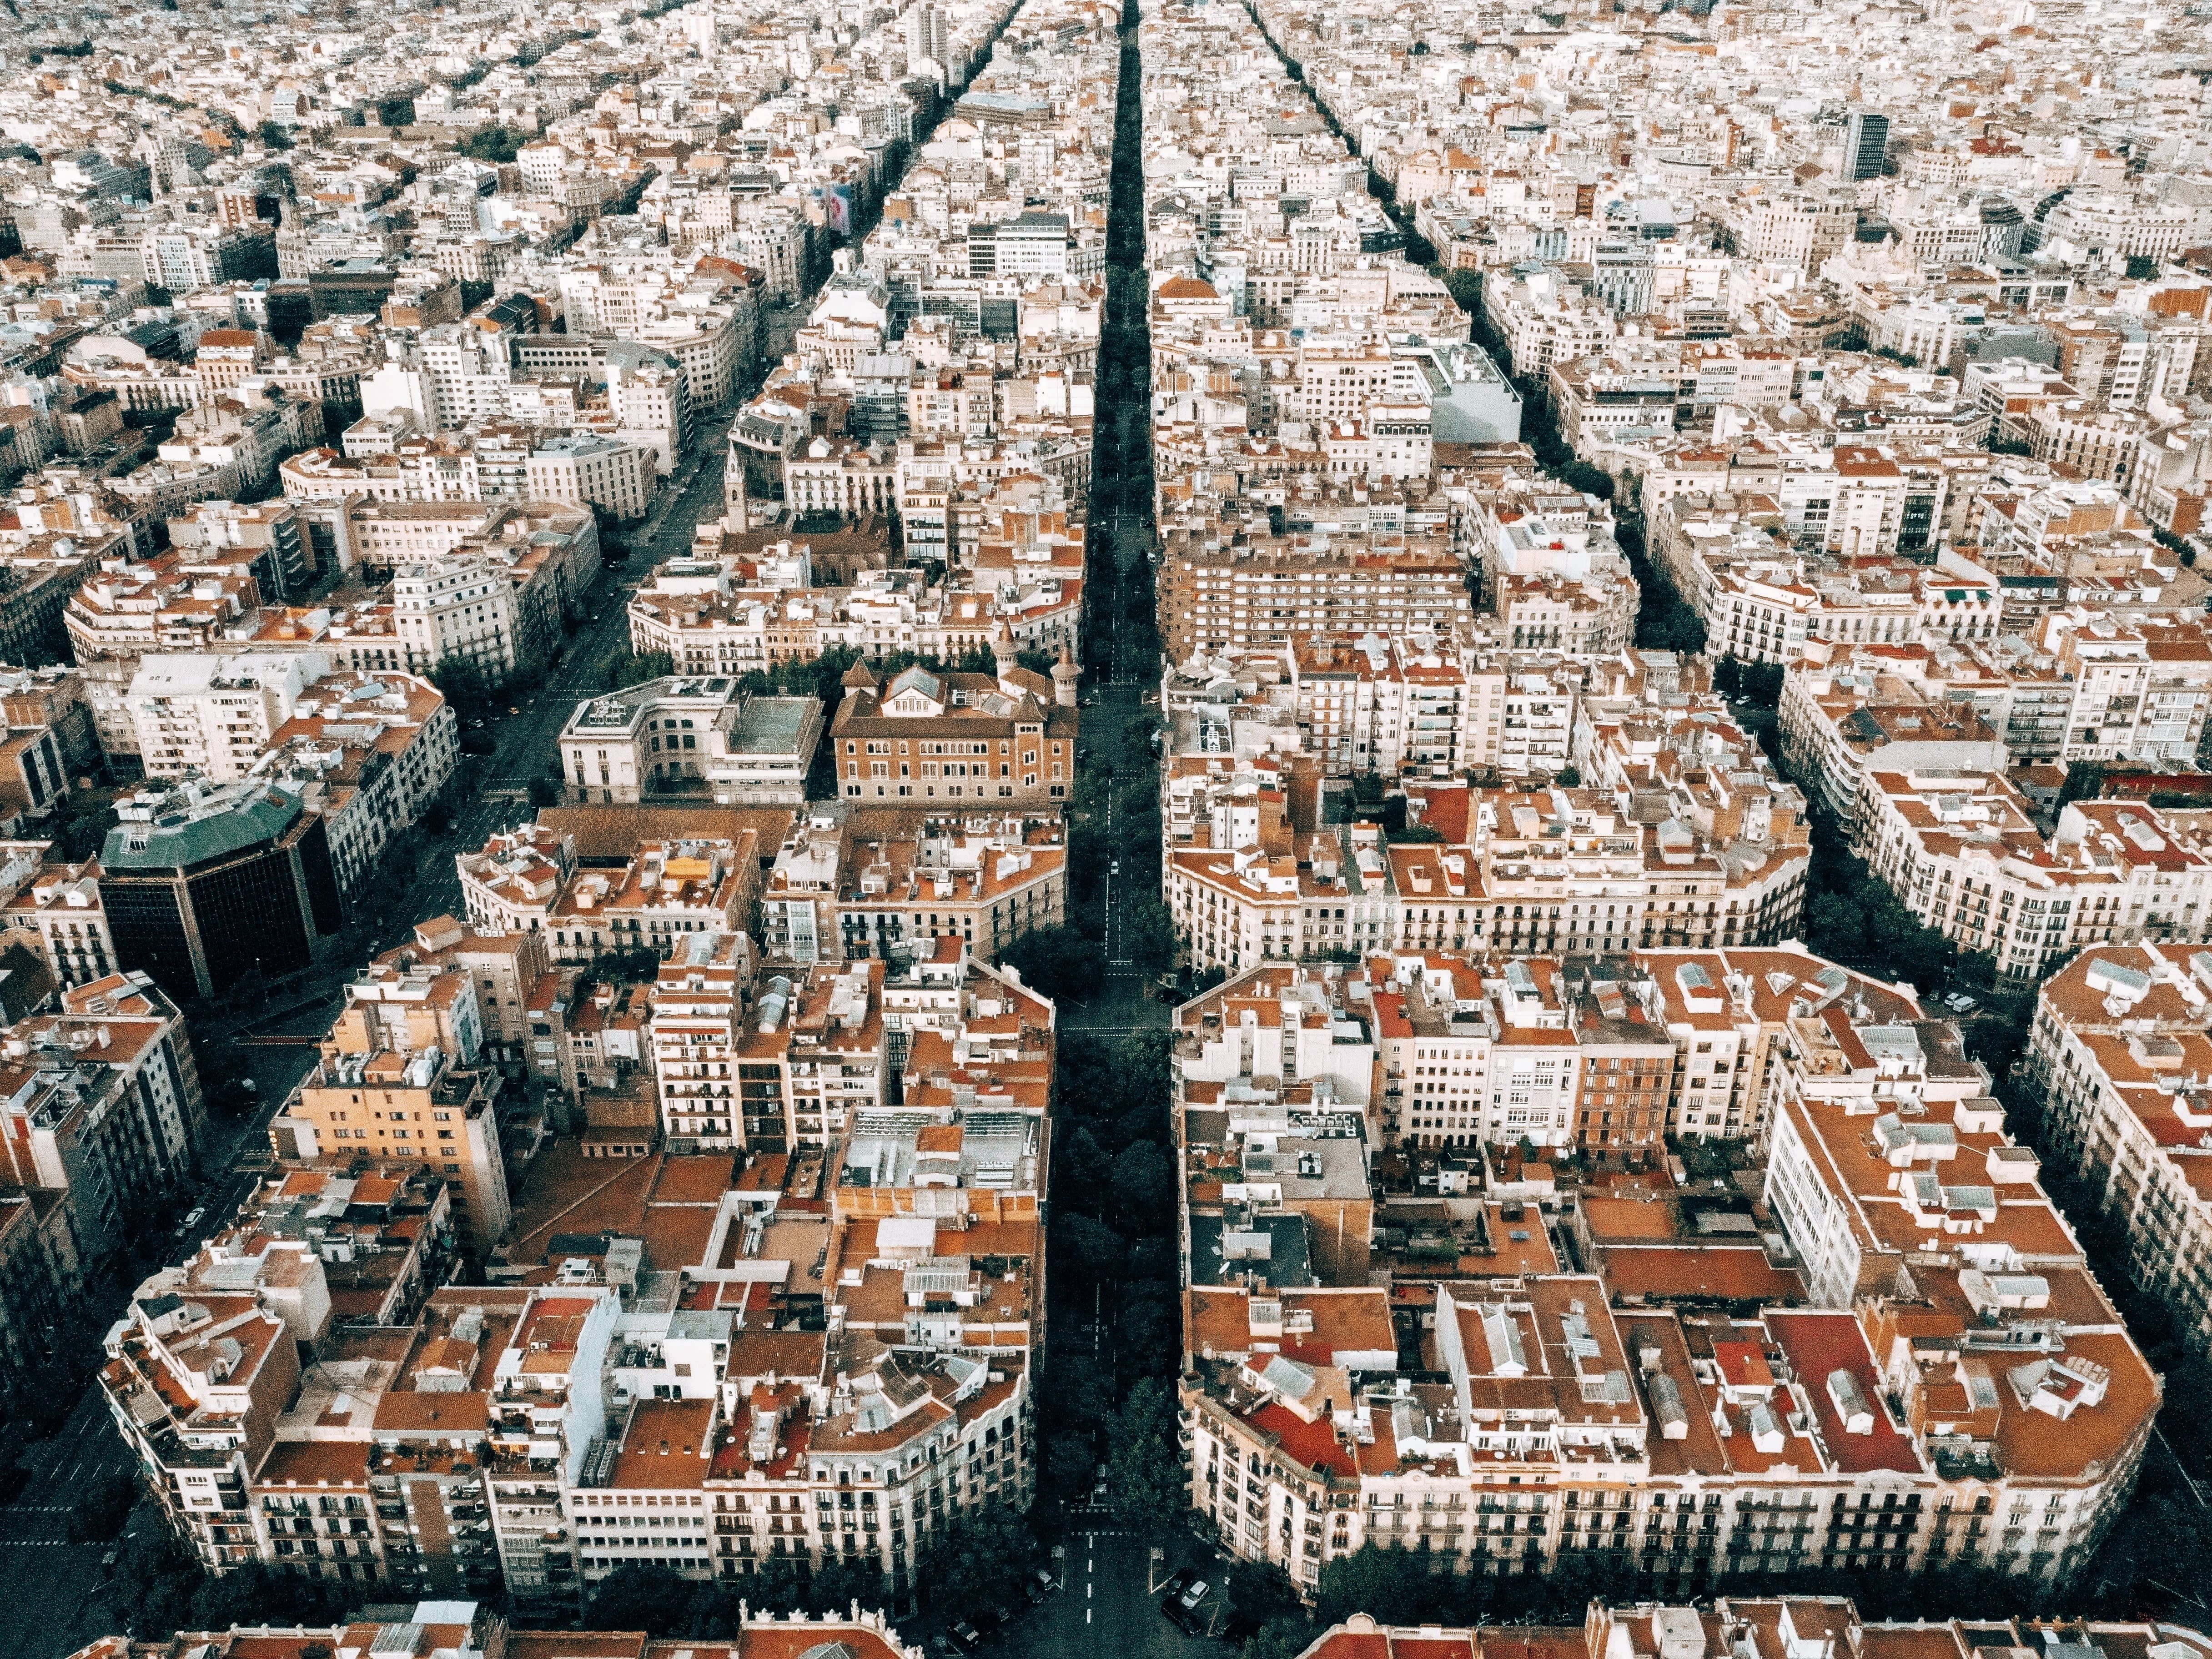 Birds-eye view of the city of Barcelona, Spain. Cost of living Barcelona (2021).